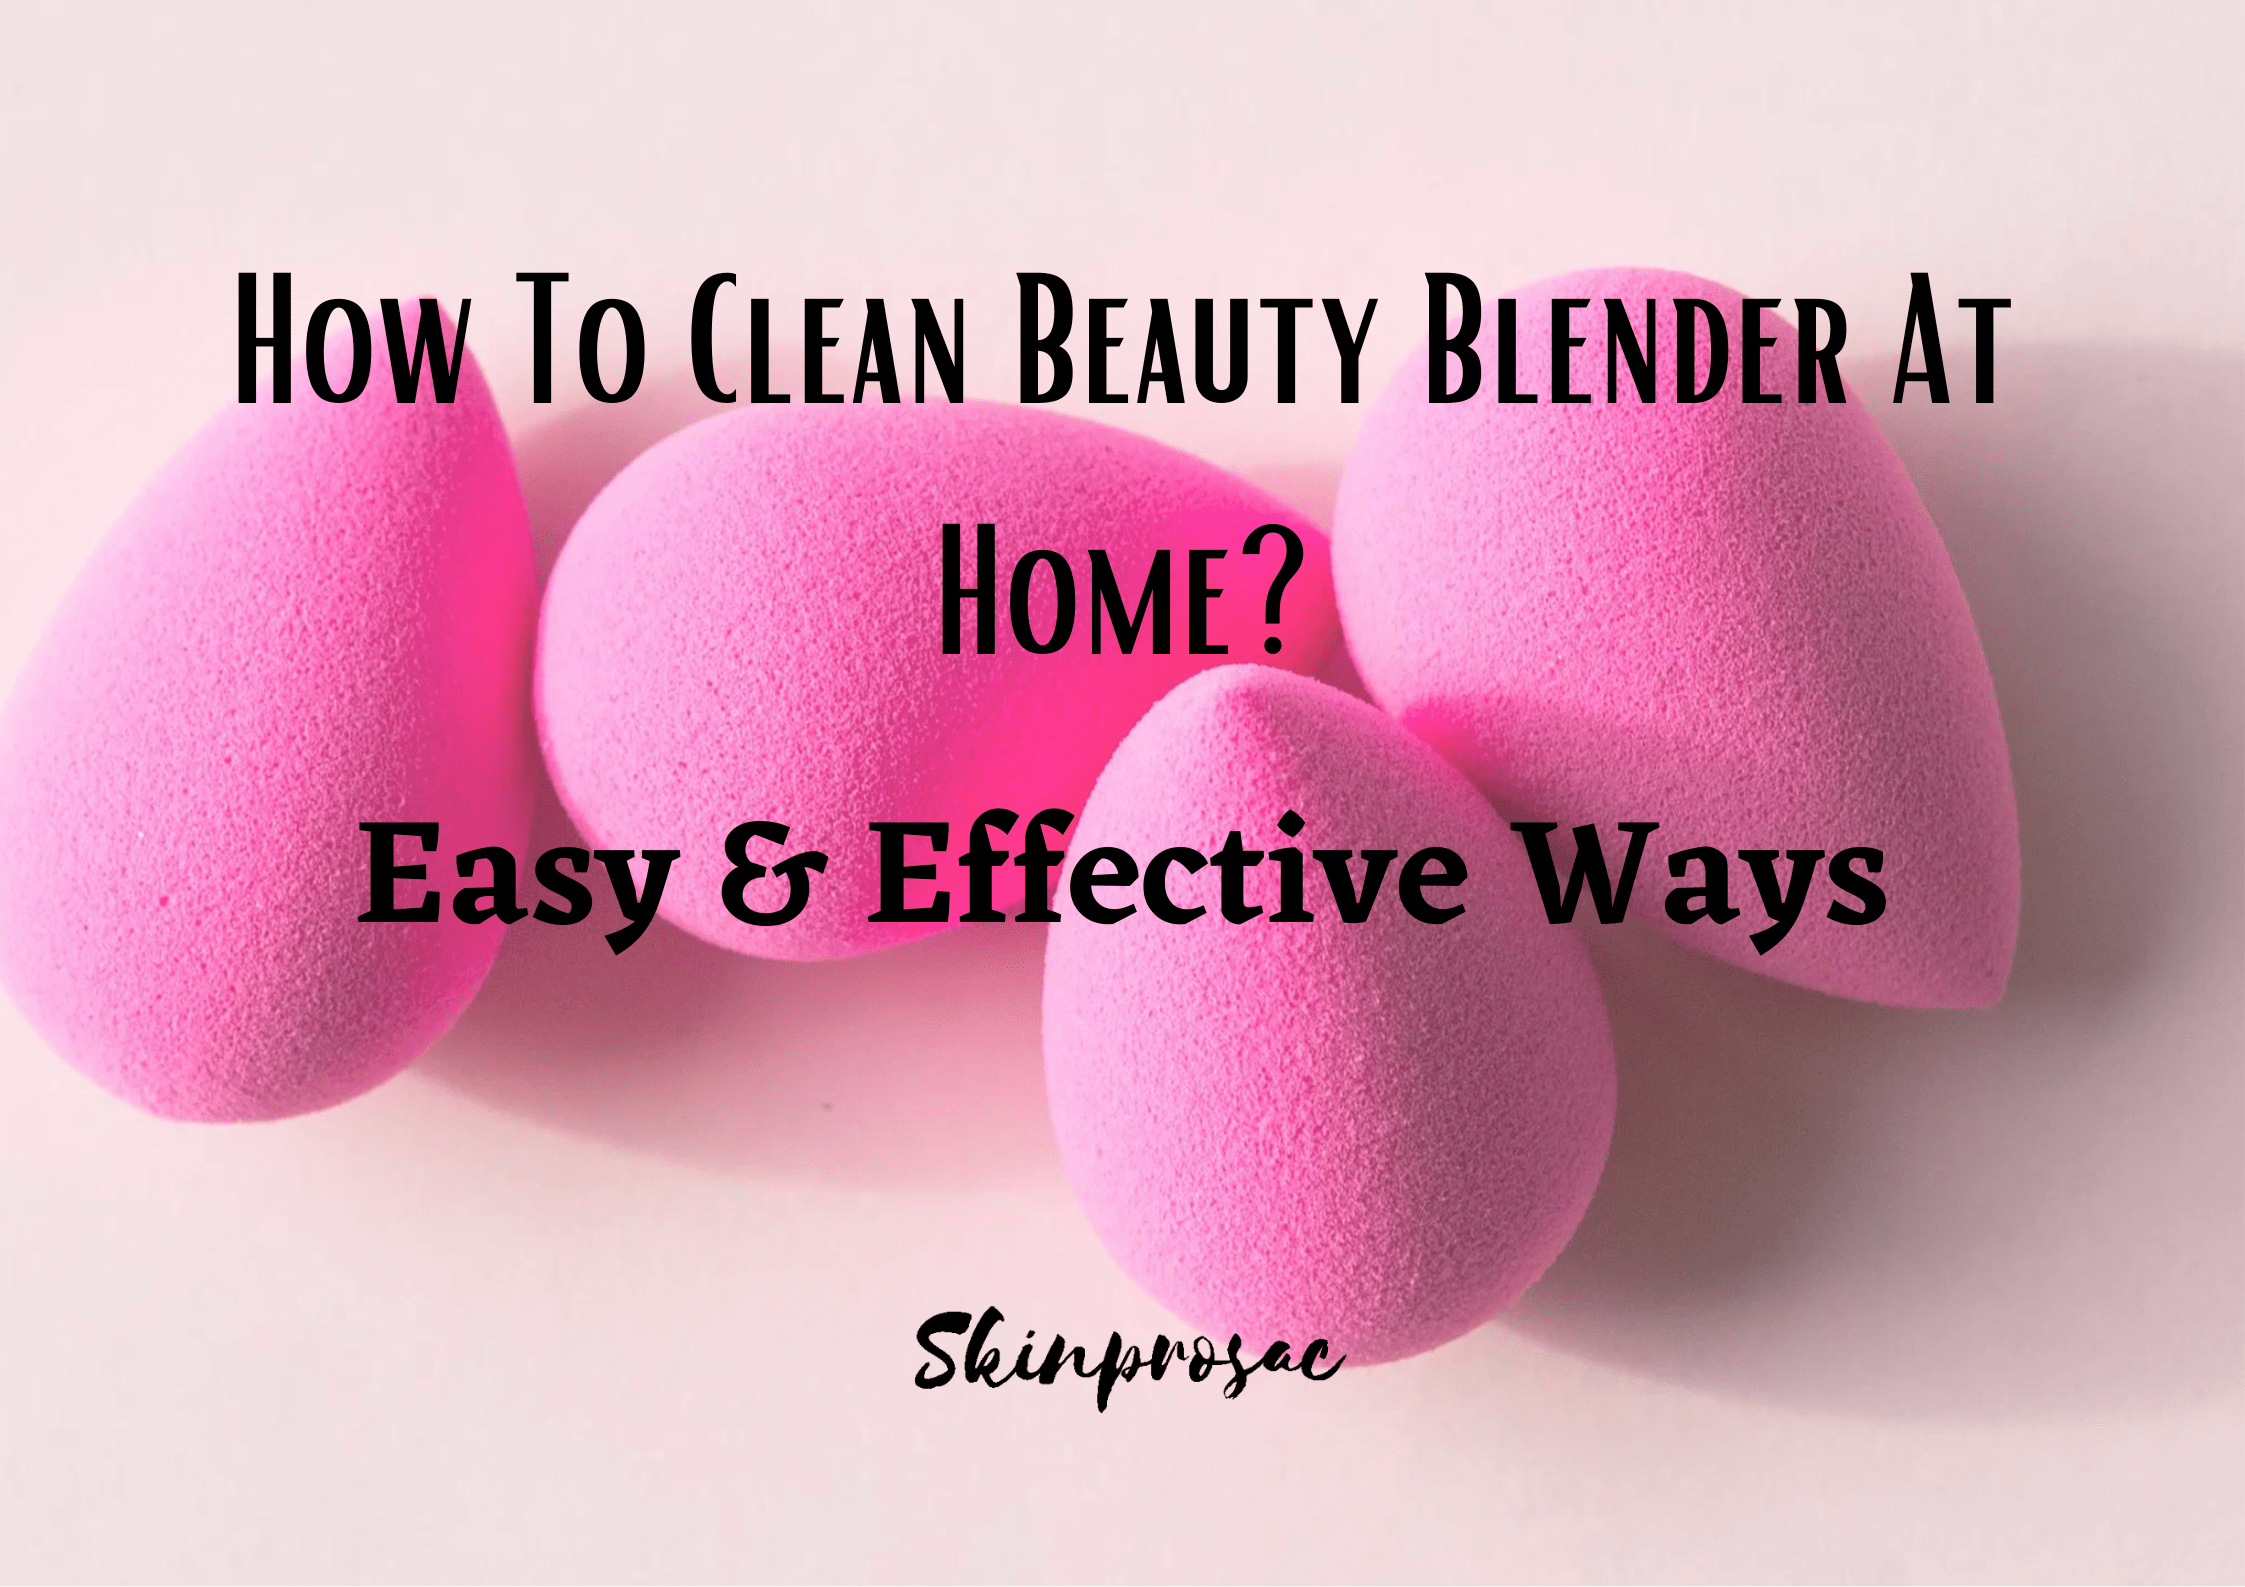 How to Clean Beauty Blender at Home